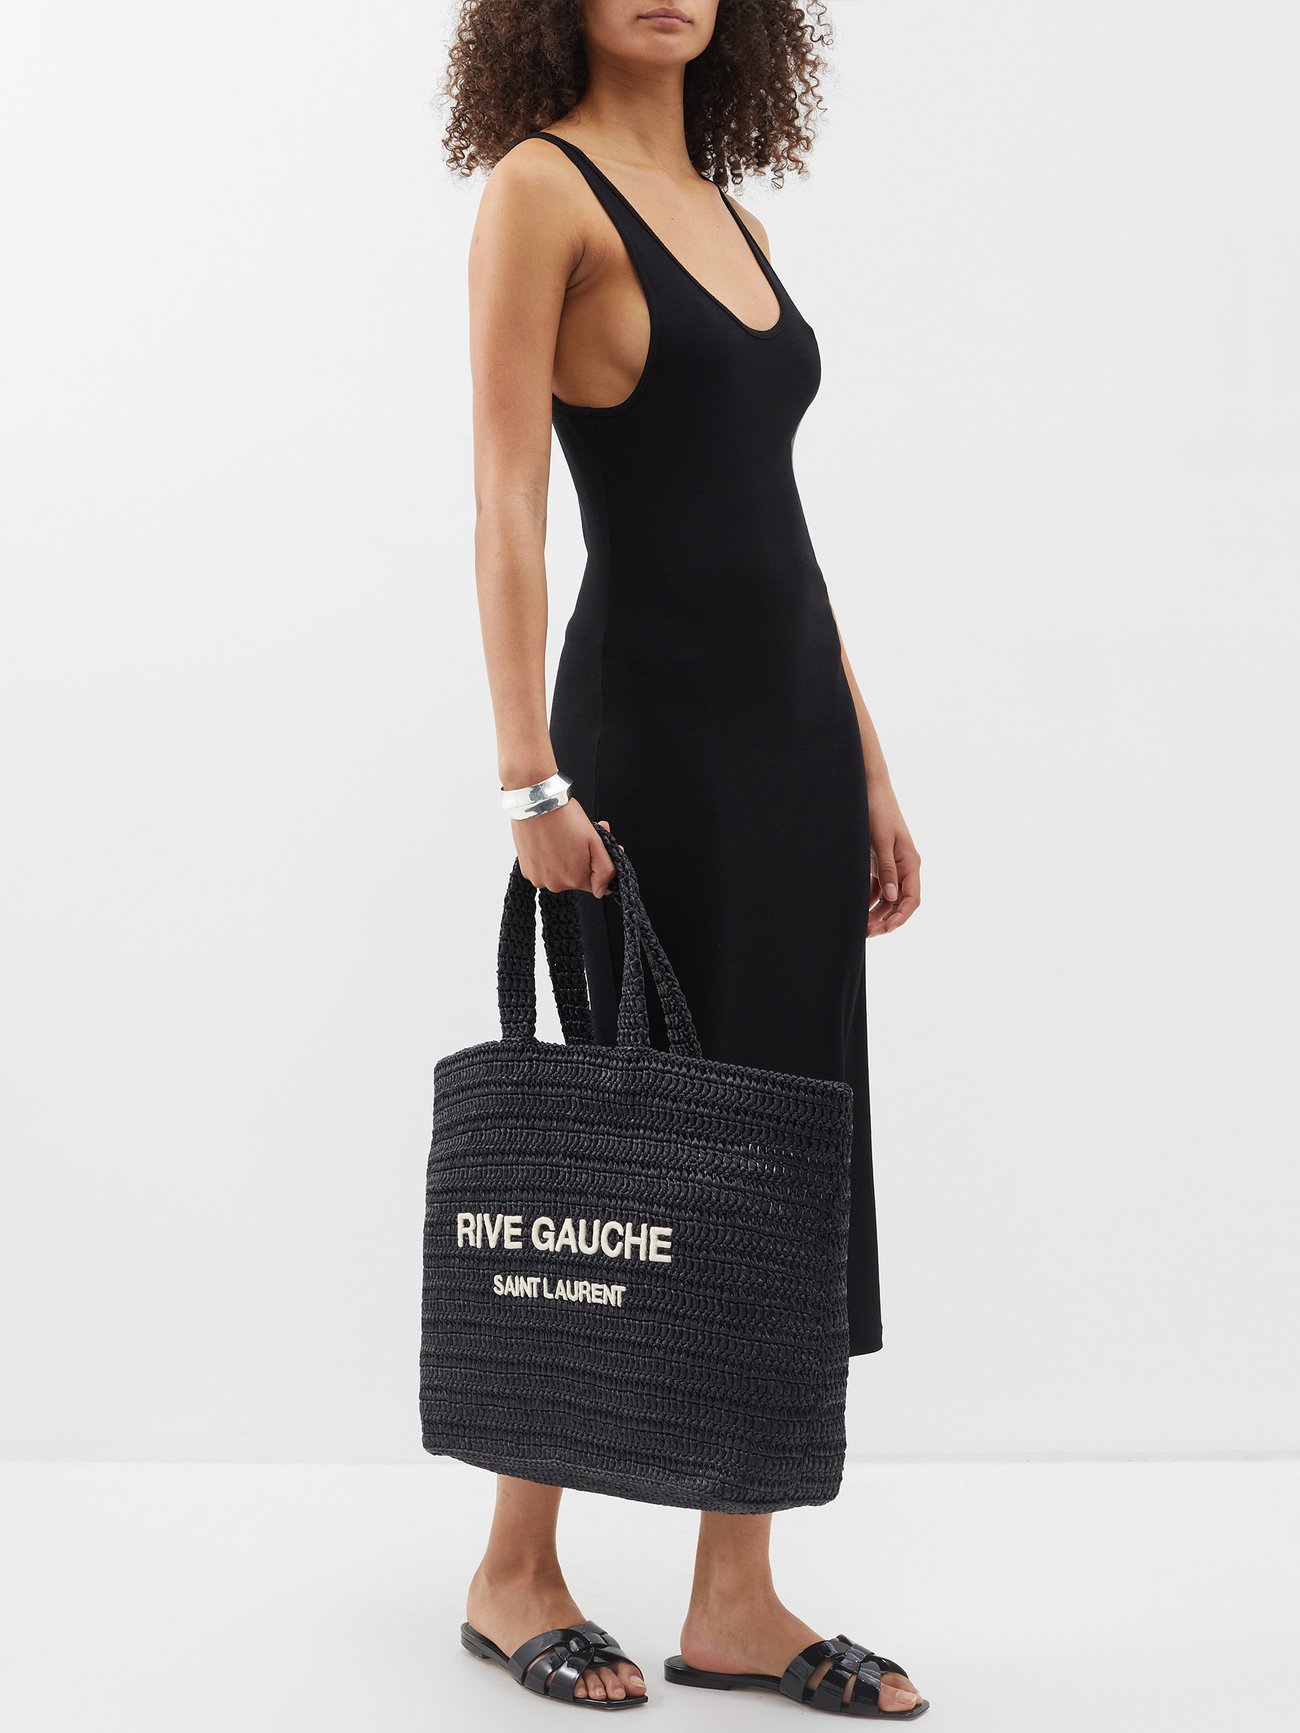 Stylish YSL Rive Gauche Tote for Beach and Travel